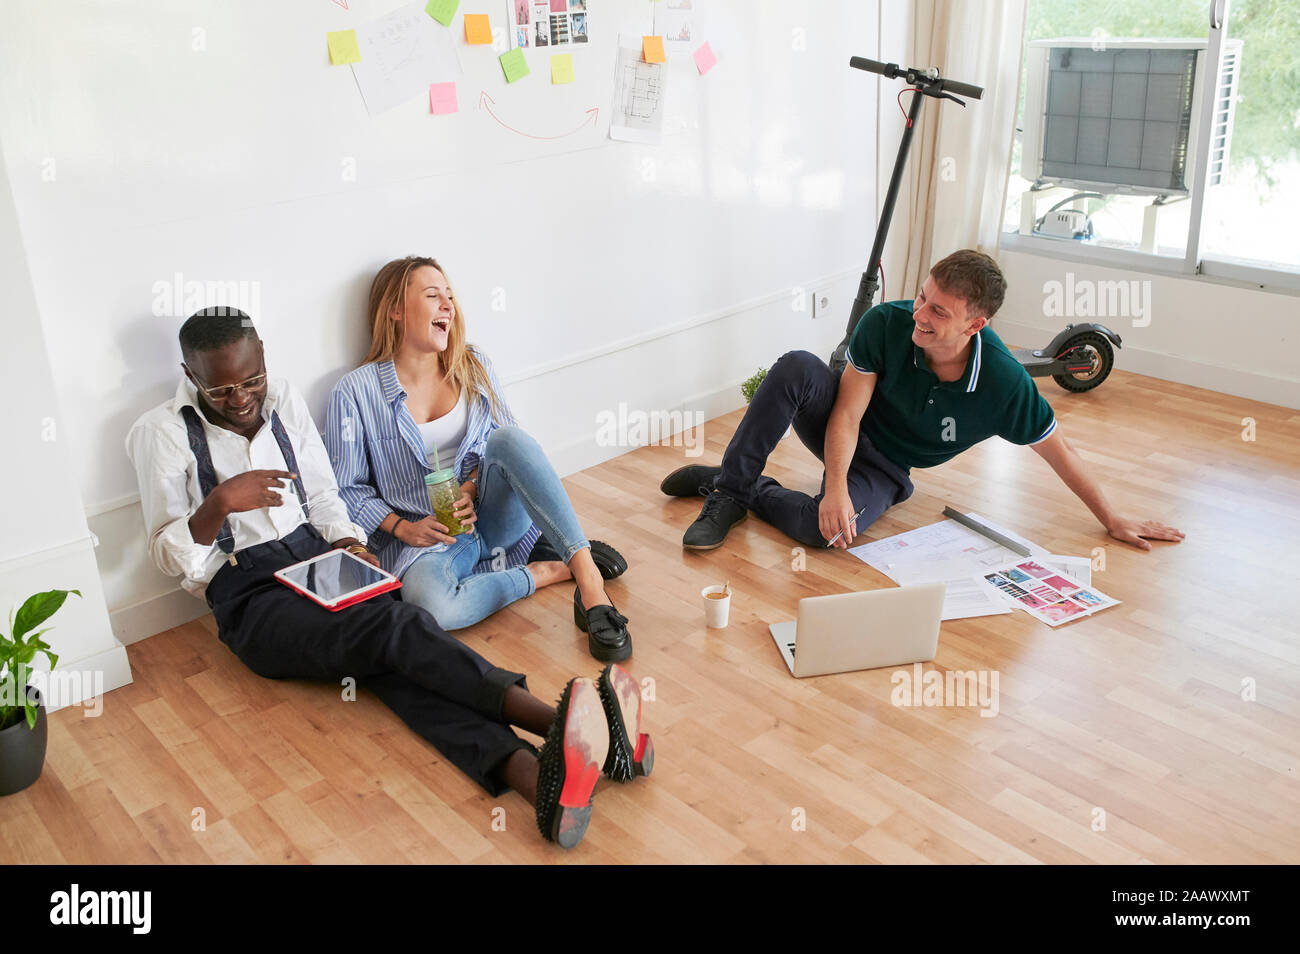 Happy young business people sitting together in an office having an informal meeting Stock Photo